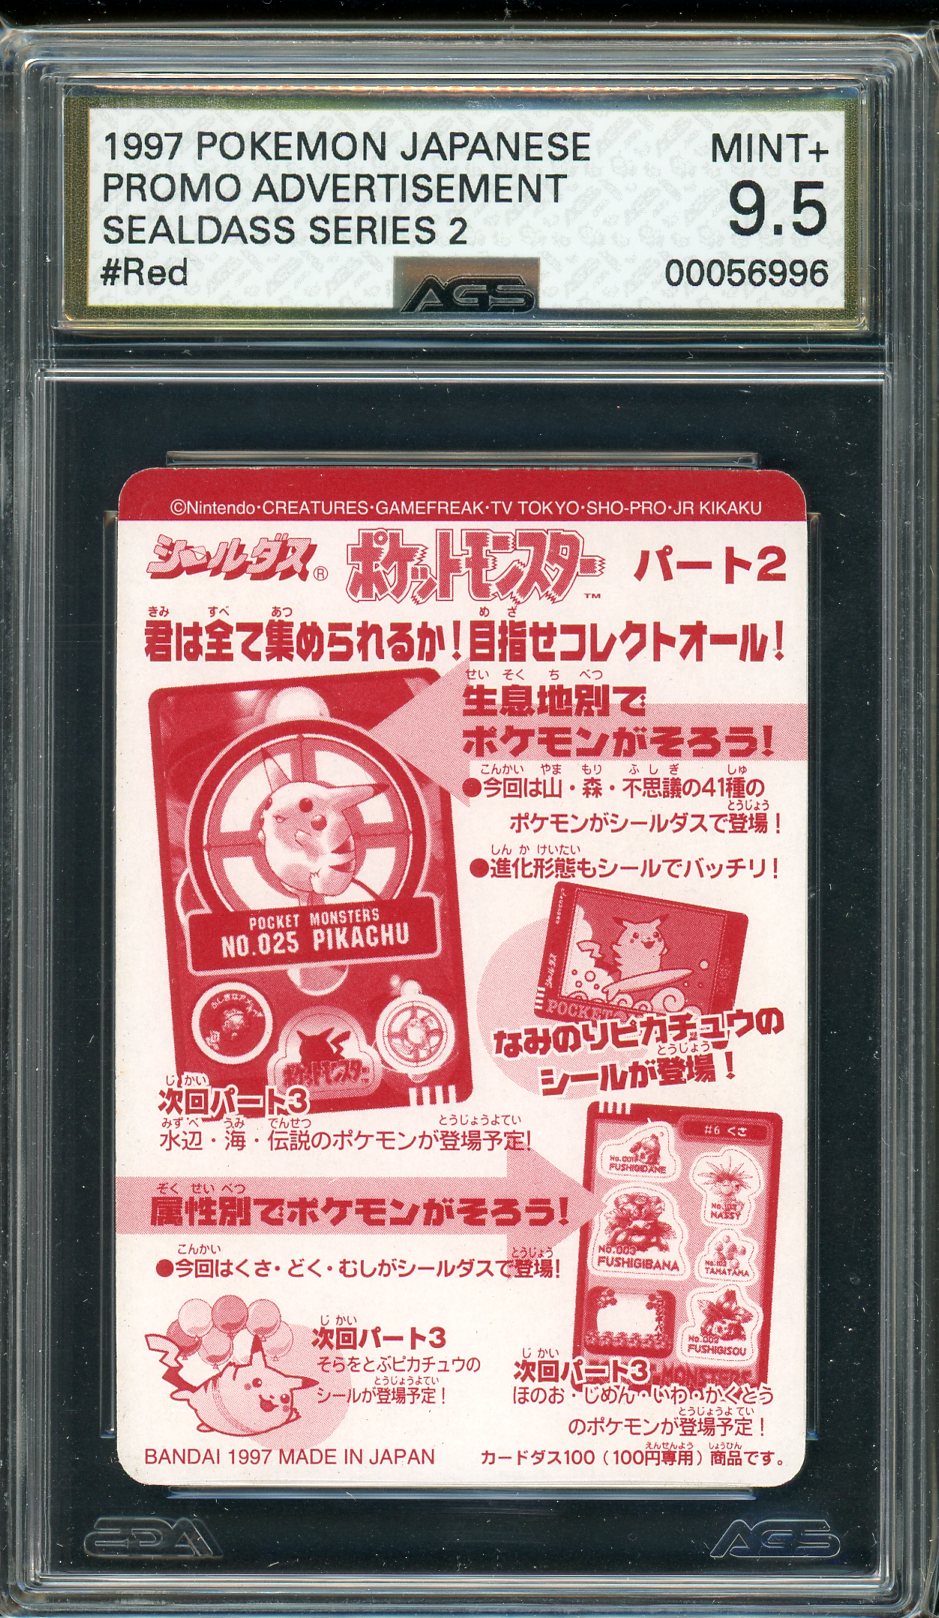 AGS (MINT+ 9.5) Promo Advertisement #Red (Japanese) - Sealdass (#00056996)